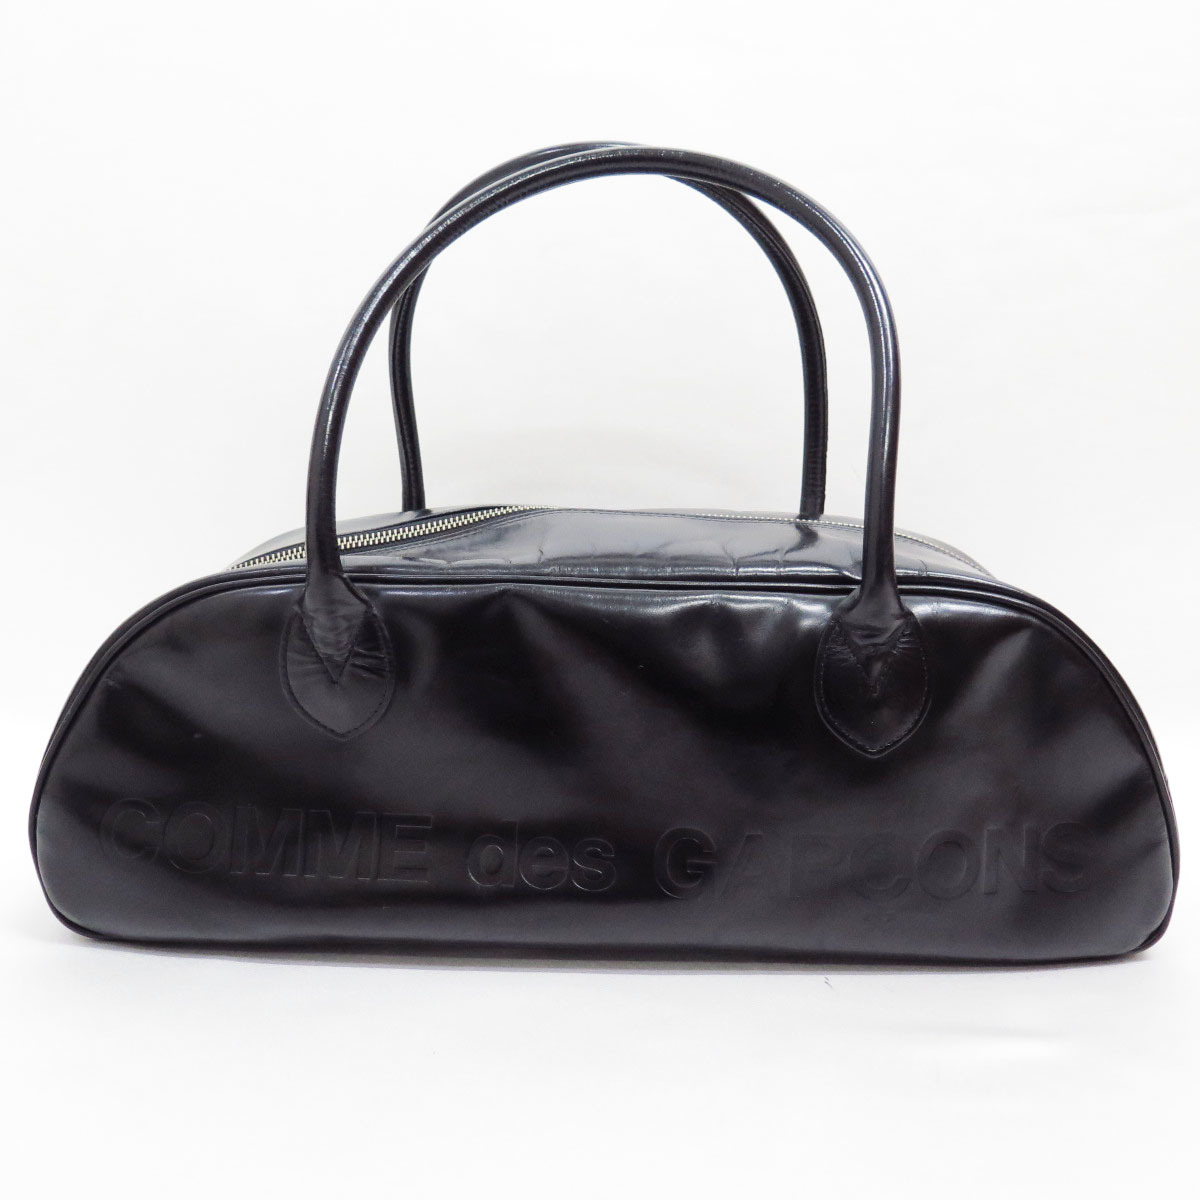 COMME des GARCONS EMBOSS LOGO LEATEHR DUFFLE BAG コムデギャルソン エンボス ロゴ ガラス レザー  ボストン バッグ